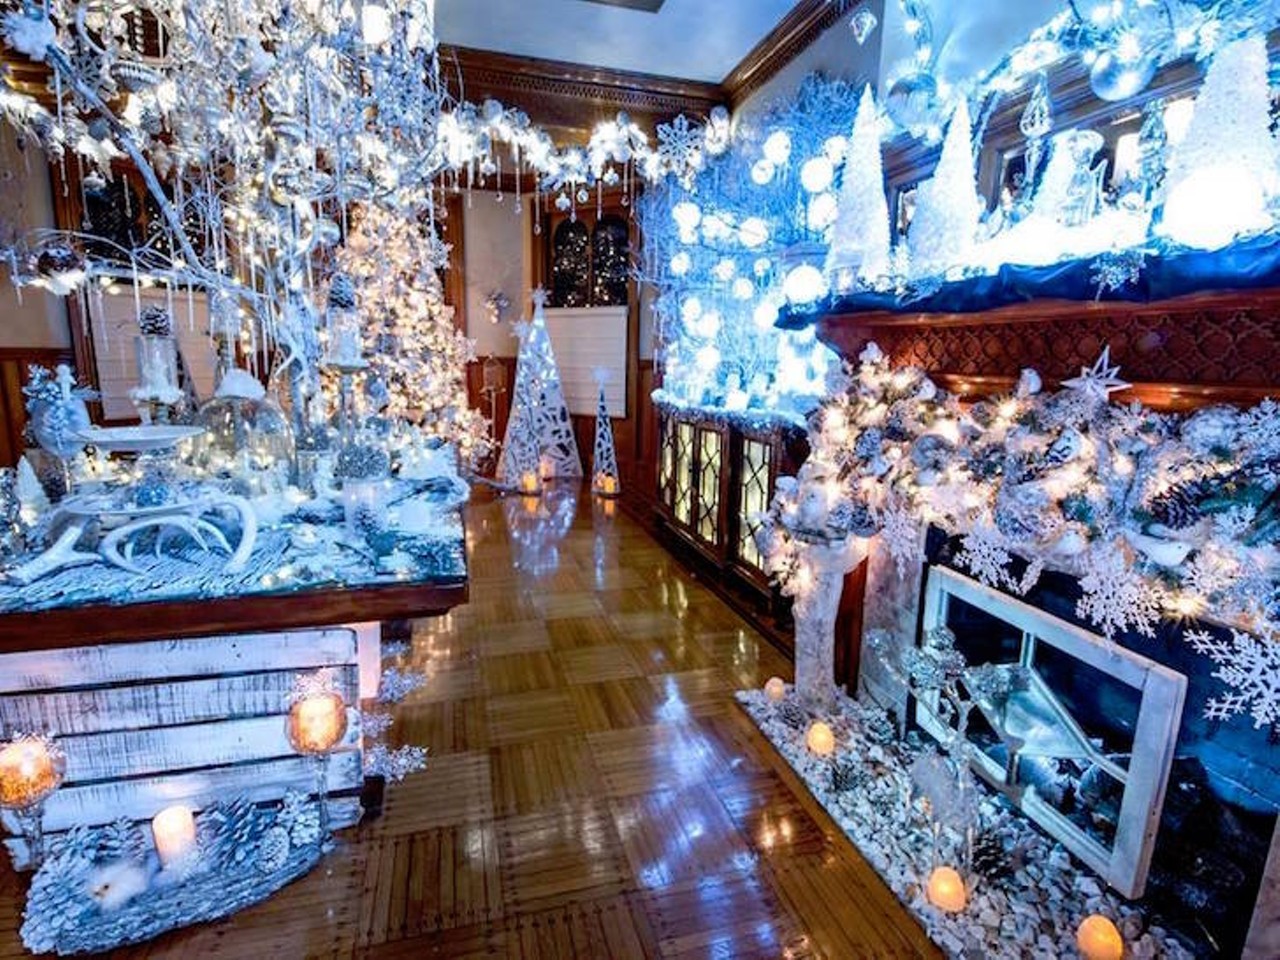 Stetson Mansion  
1031 Camphor Lane, Deland
Nov. 15-Jan. 15 2019
There&#146;s the way your mom decorates her house, and then there&#146;s the way the Stetson Mansion decks the halls. Taking a tour of this vintage home is nothing short of awe-inspiring. Put on your festive walking shoes and take a tour at either 10:30 a.m., 1:30 p.m., or 5:00 p.m. daily.
Photo via Stetson Mansion Tours/Facebook